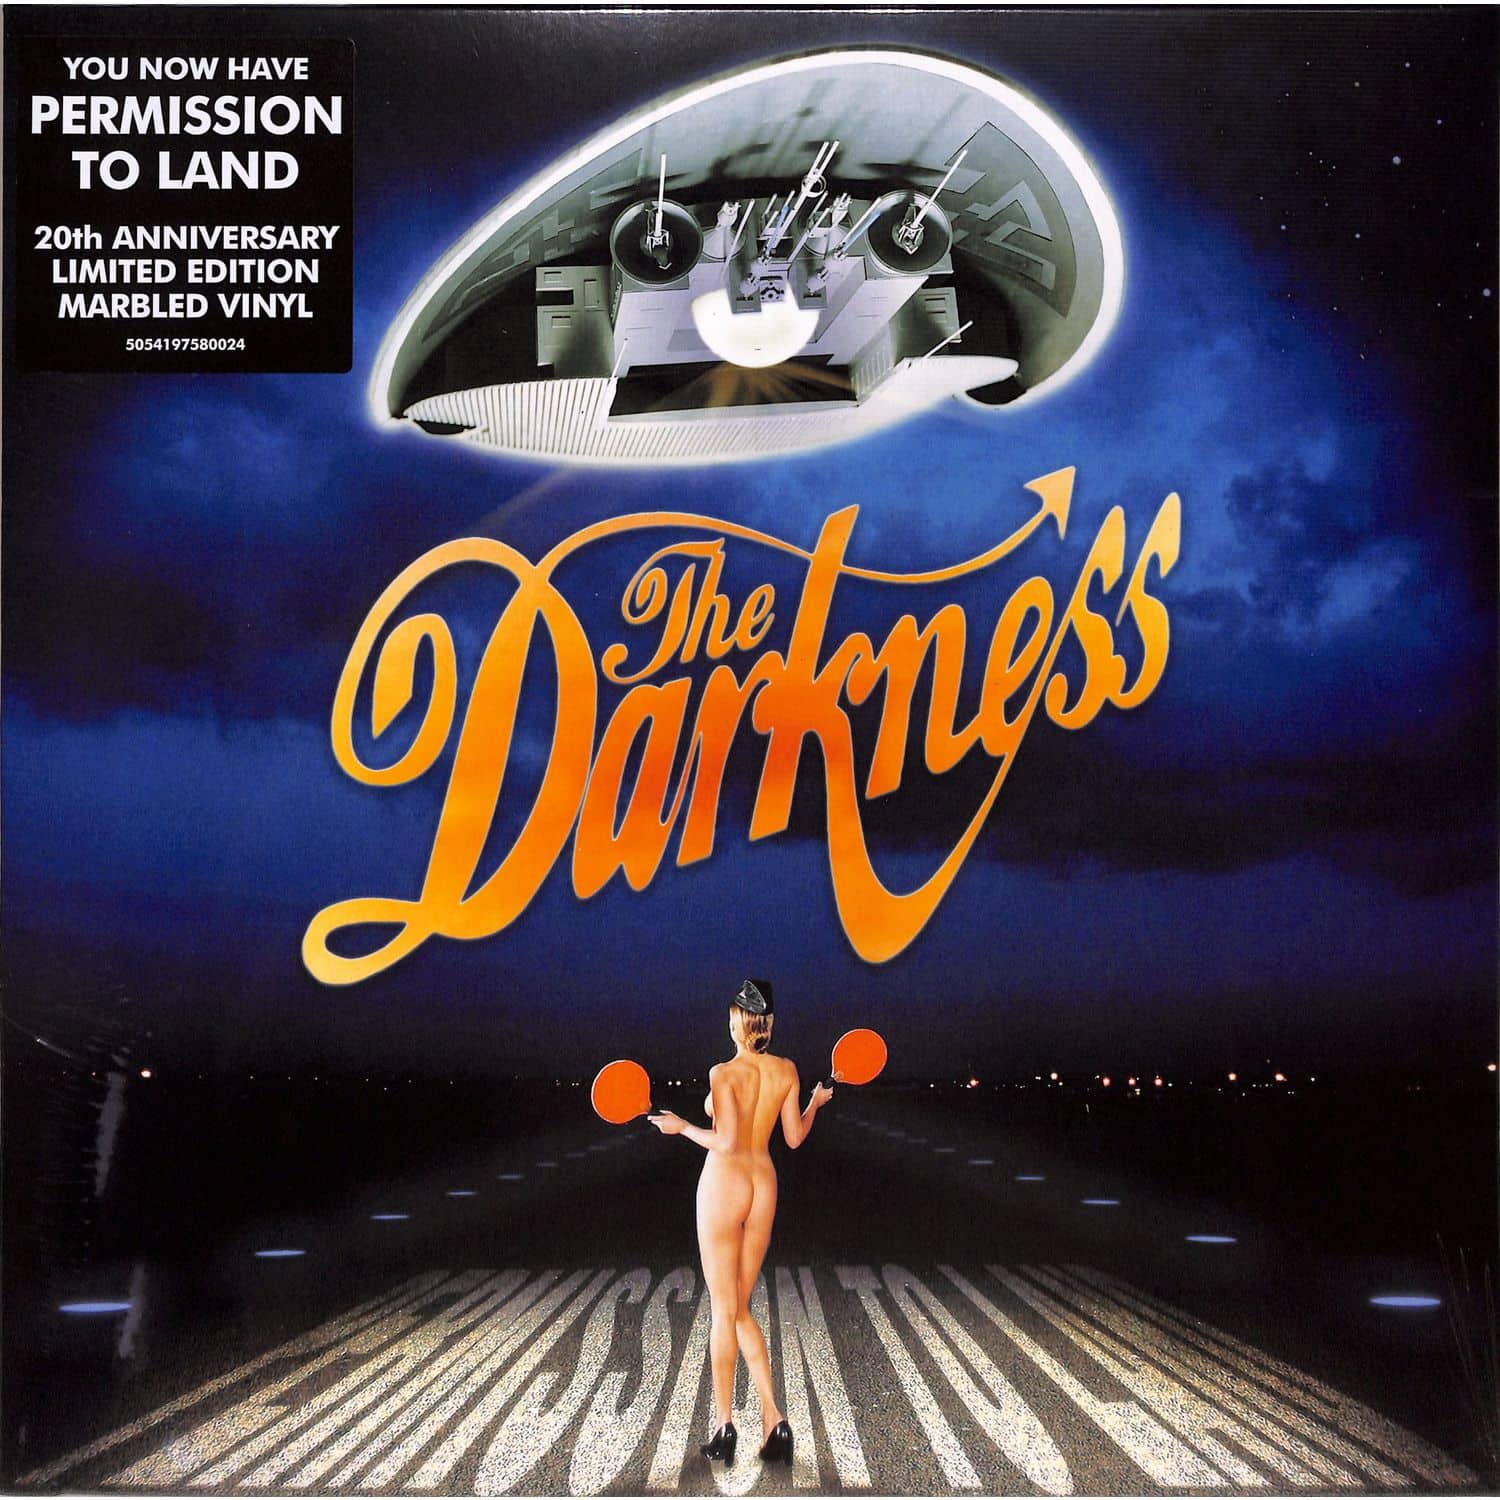 The Darkness - PERMISSION TO LAND 